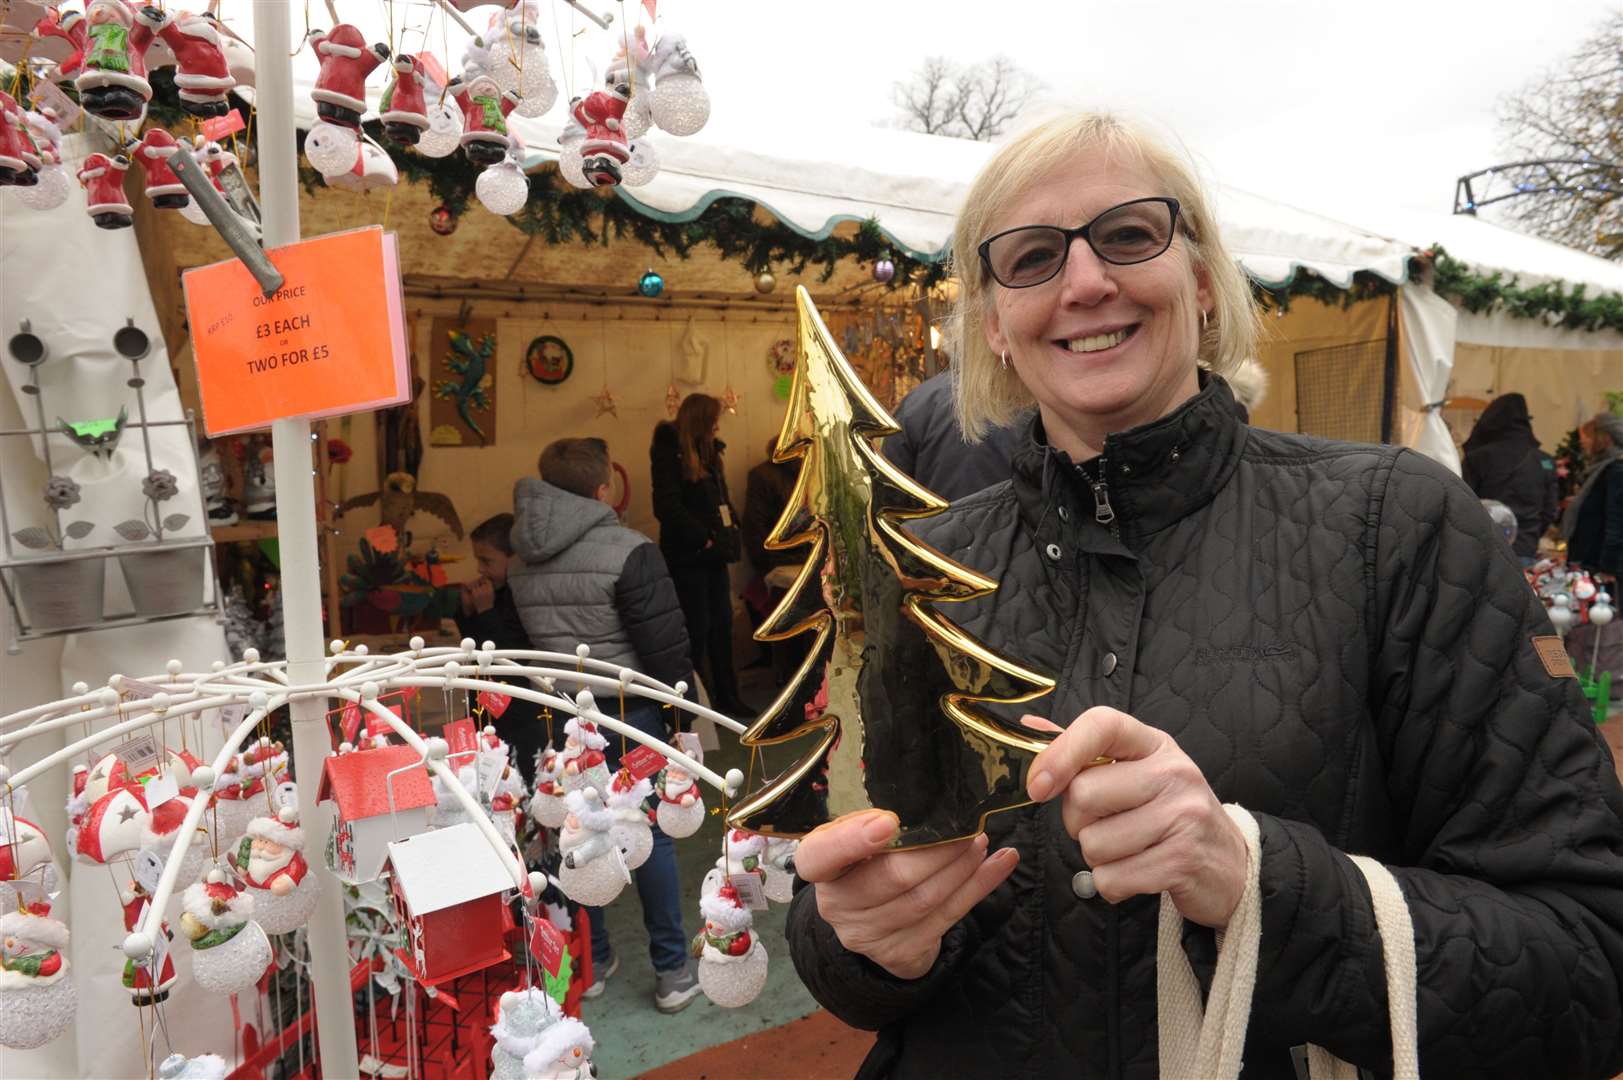 Rochester Castle Gardens will have a Christmas market and festive fairground